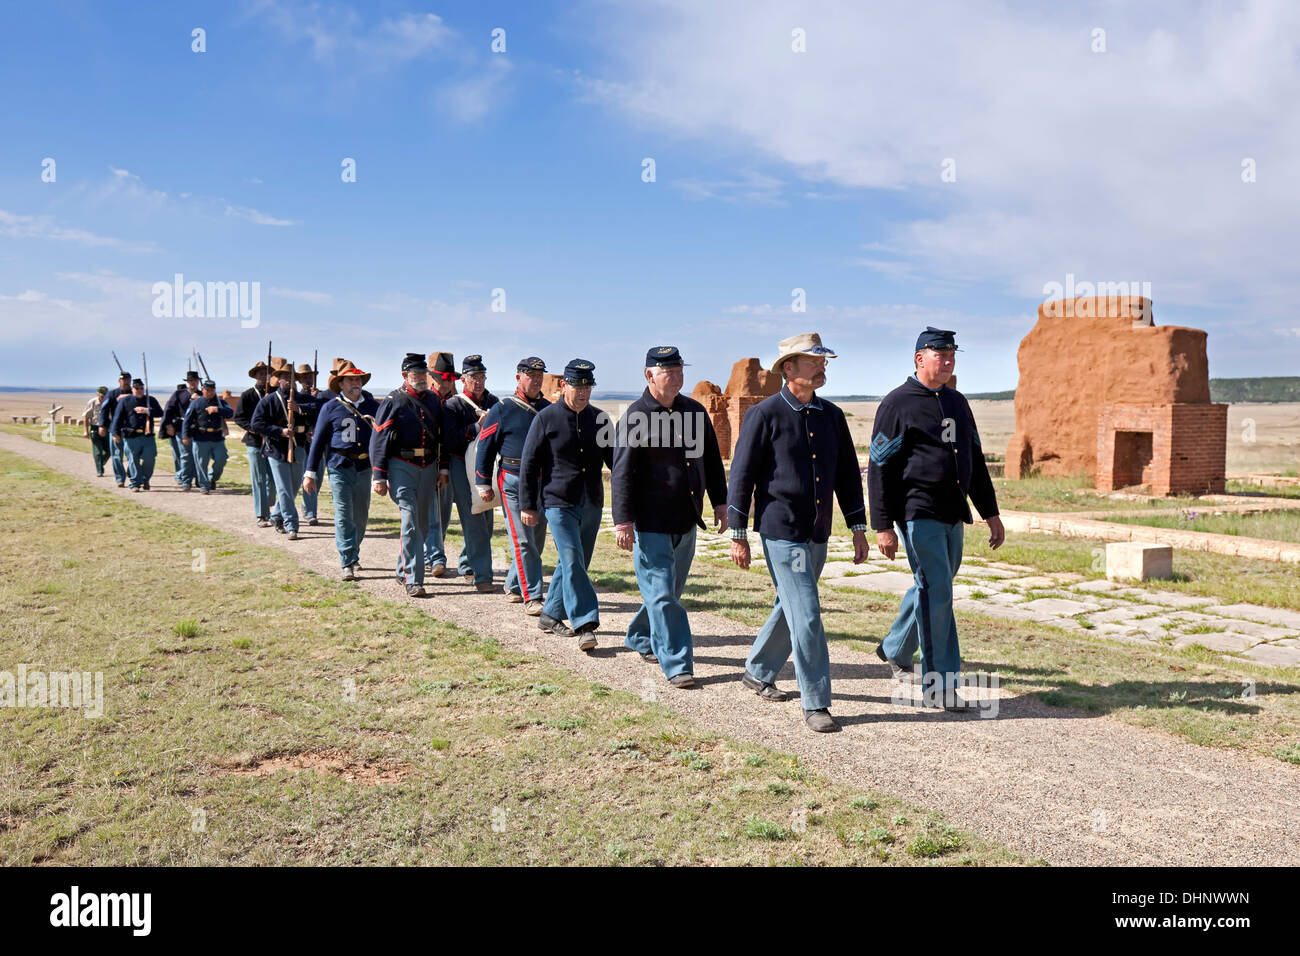 Civil War Era Union soldier reenactors marching in formation, Fort Union National Monument, New Mexico USA Stock Photo